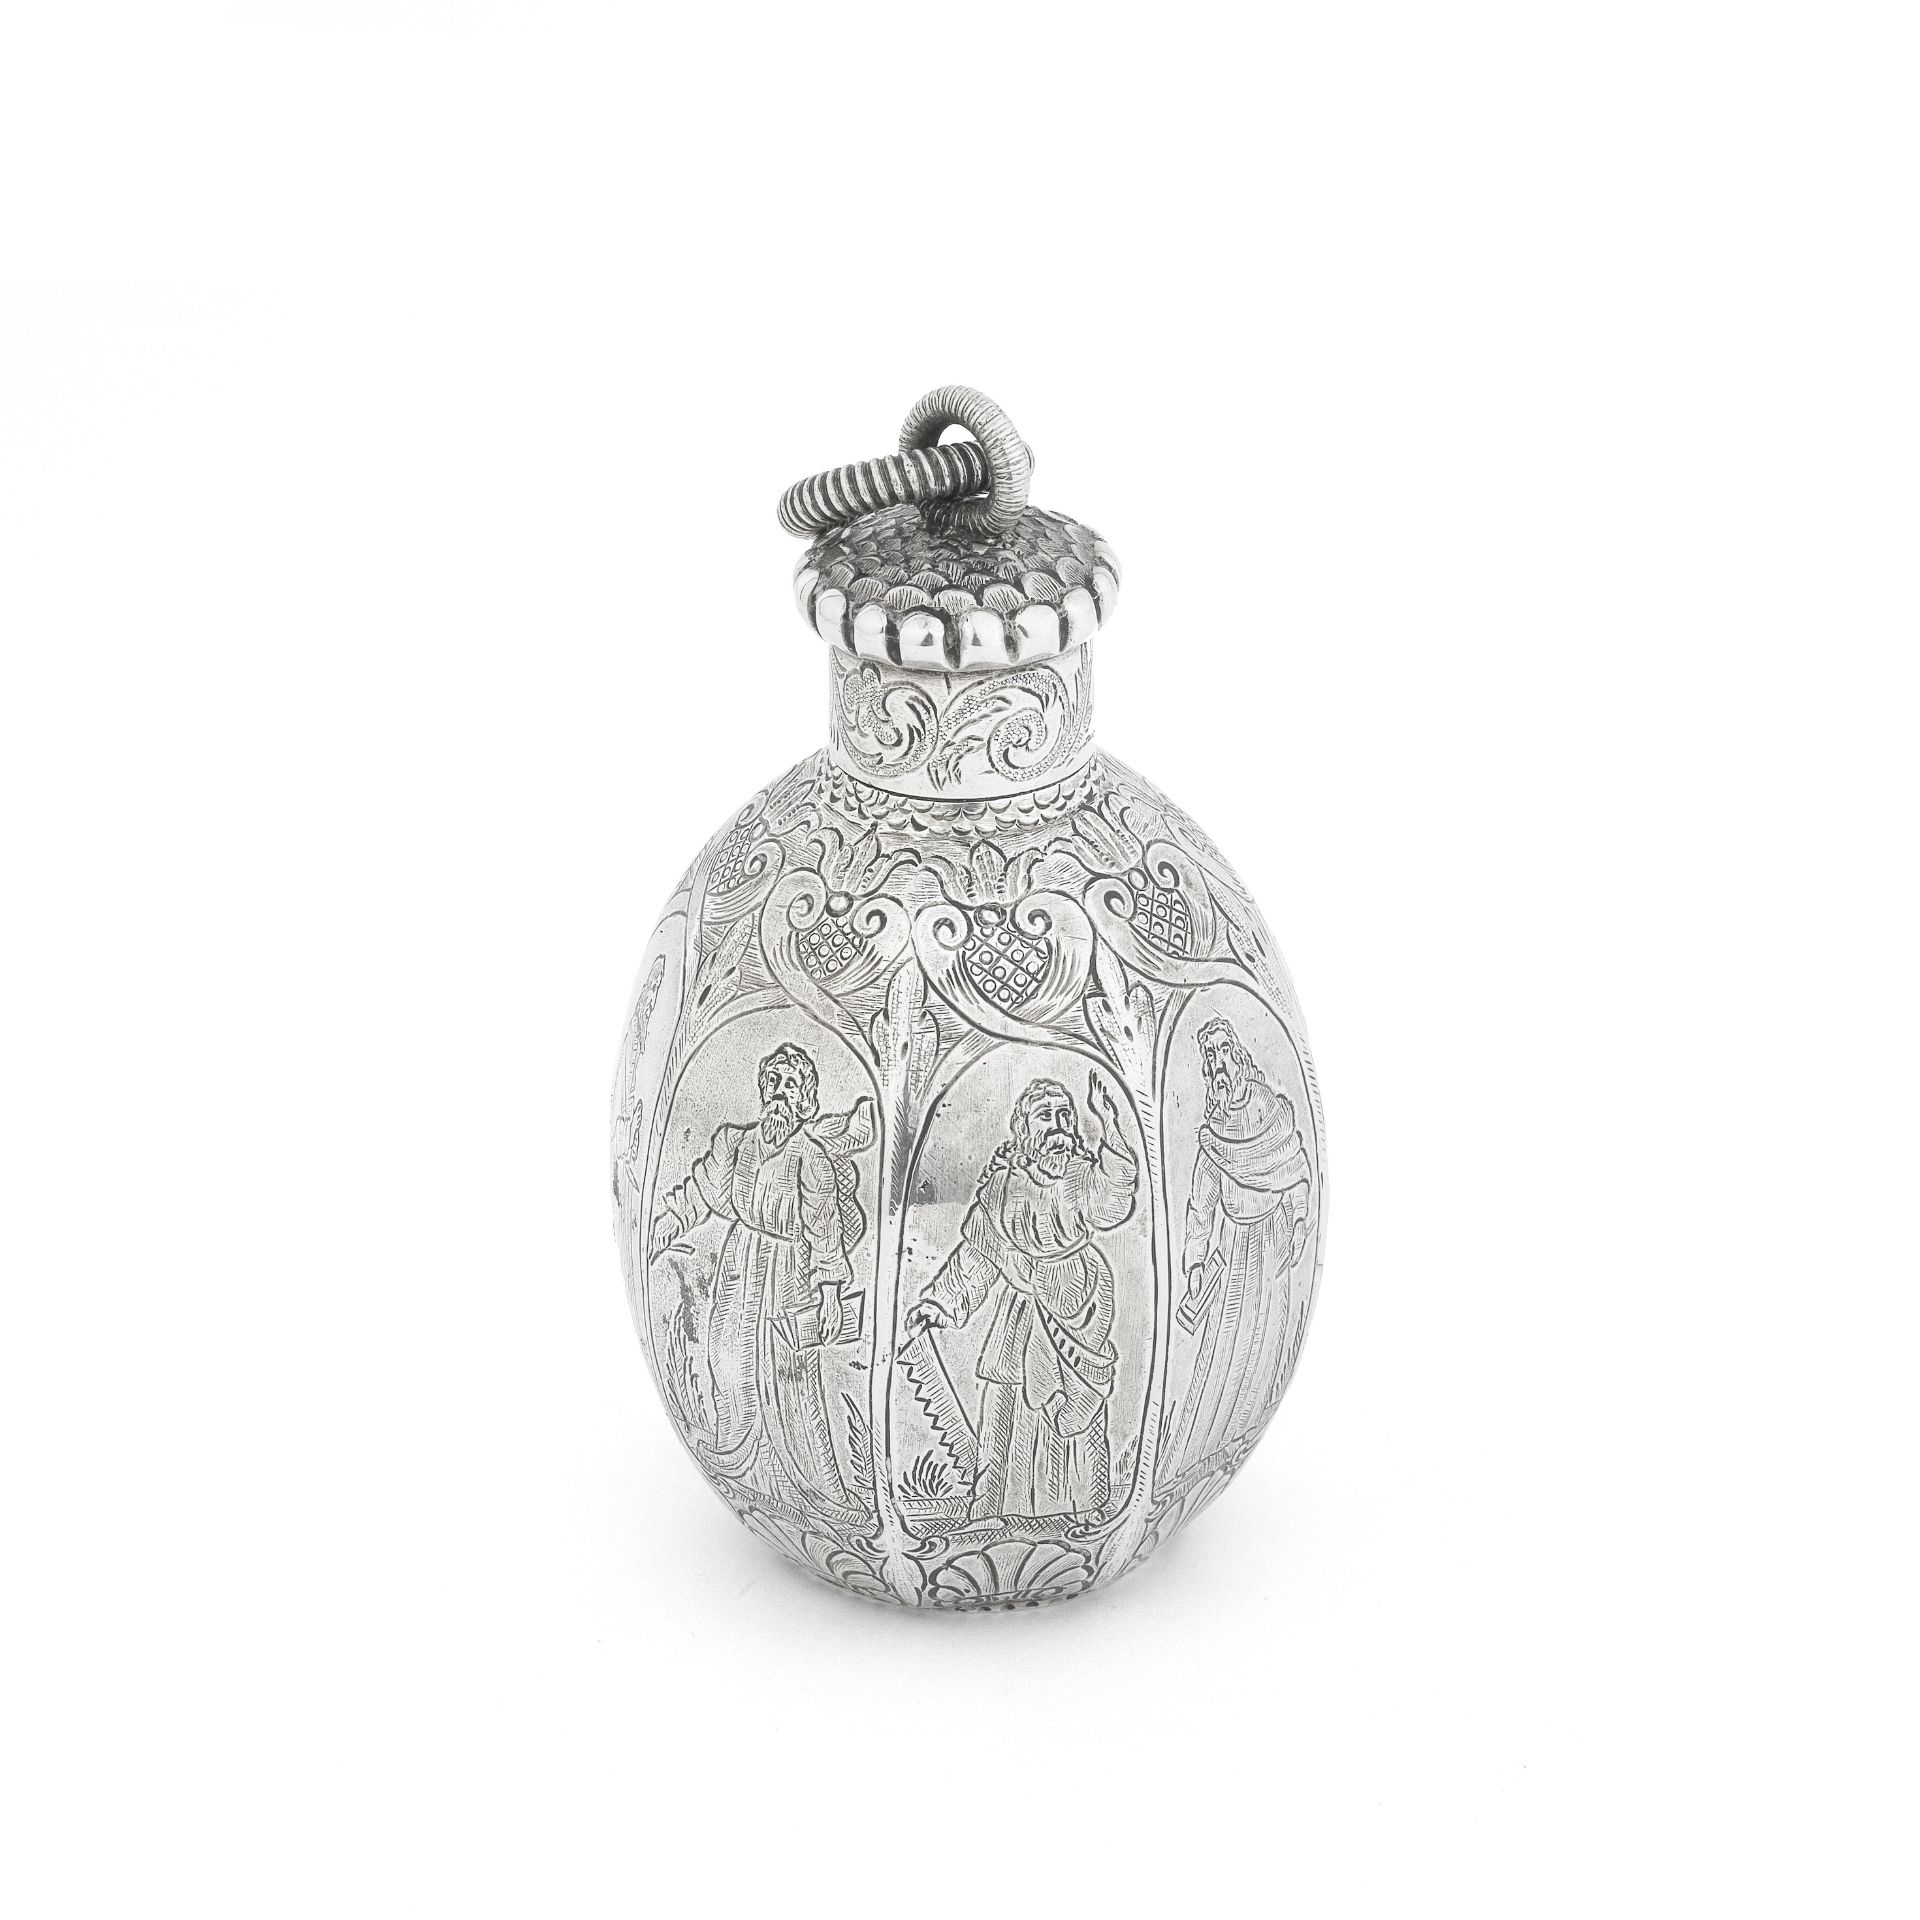 A continental silver scent bottle with two marks struck through